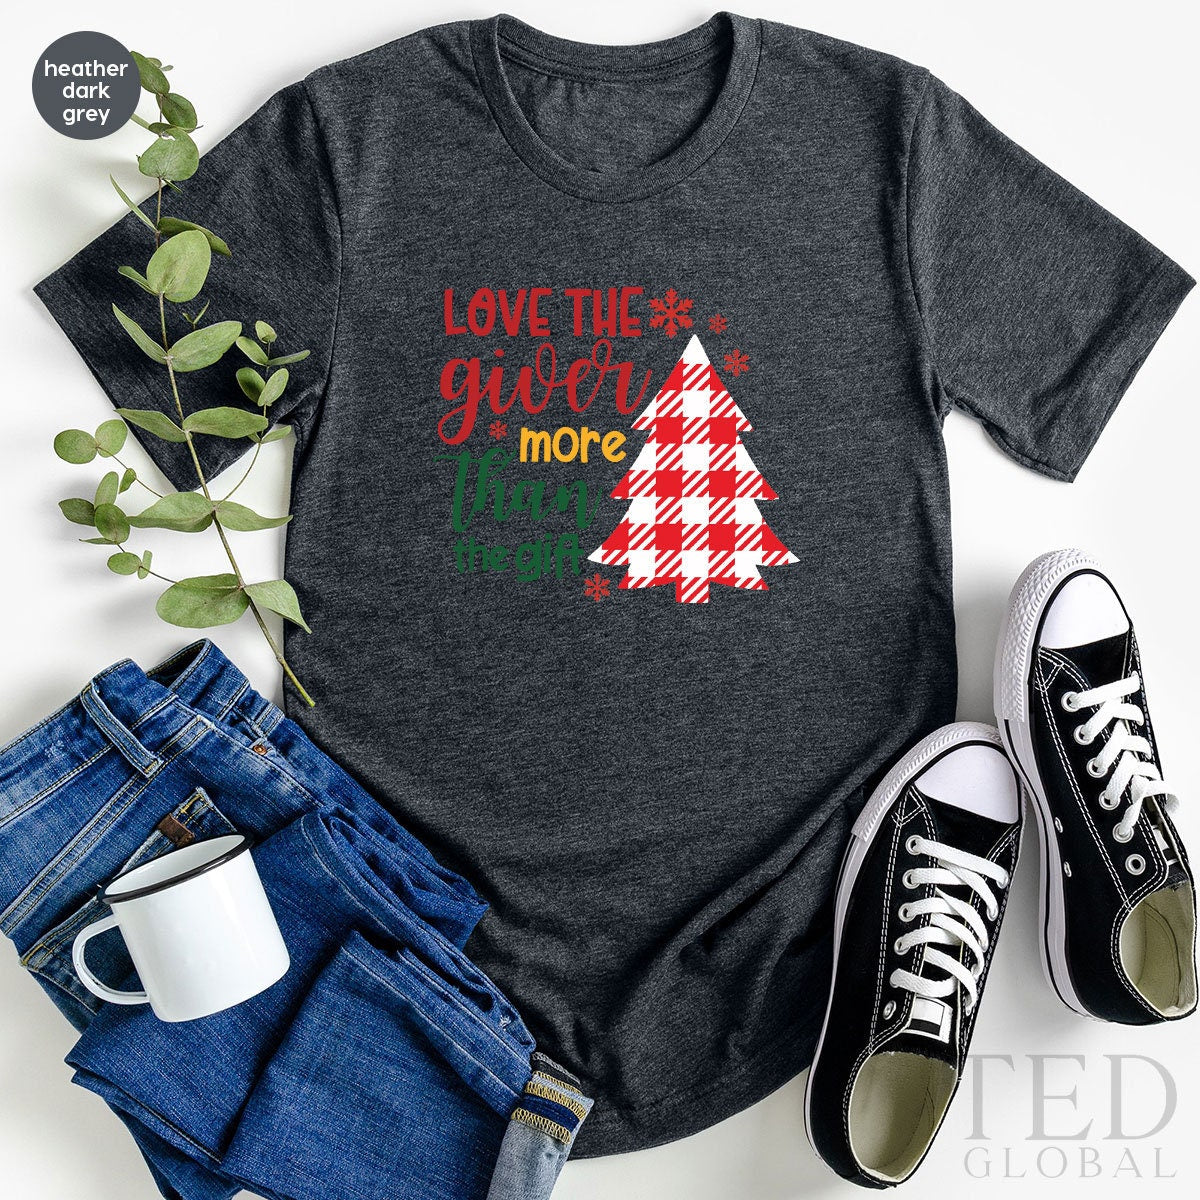 Cute Official Cookie Taster Ba Christmas Funny T-Shirt, Baking Shirts, –